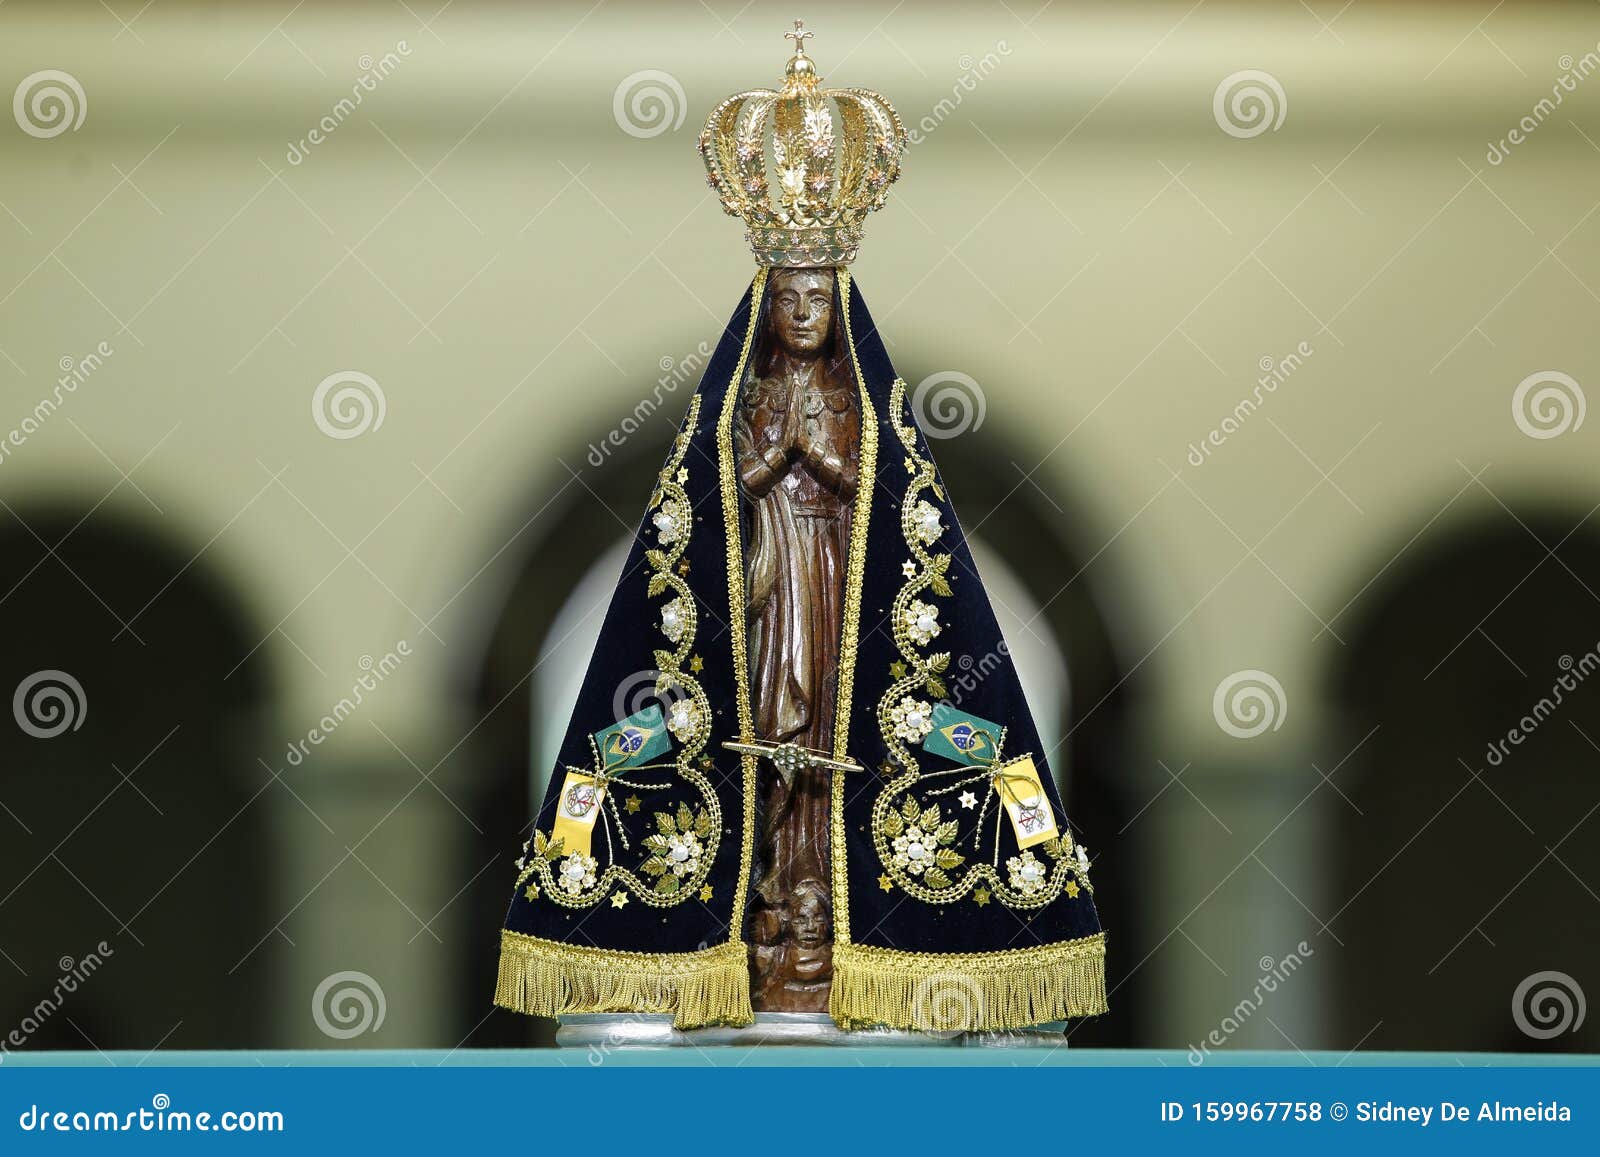 image of our lady of aparecida - statue of the image of our lady of aparecida